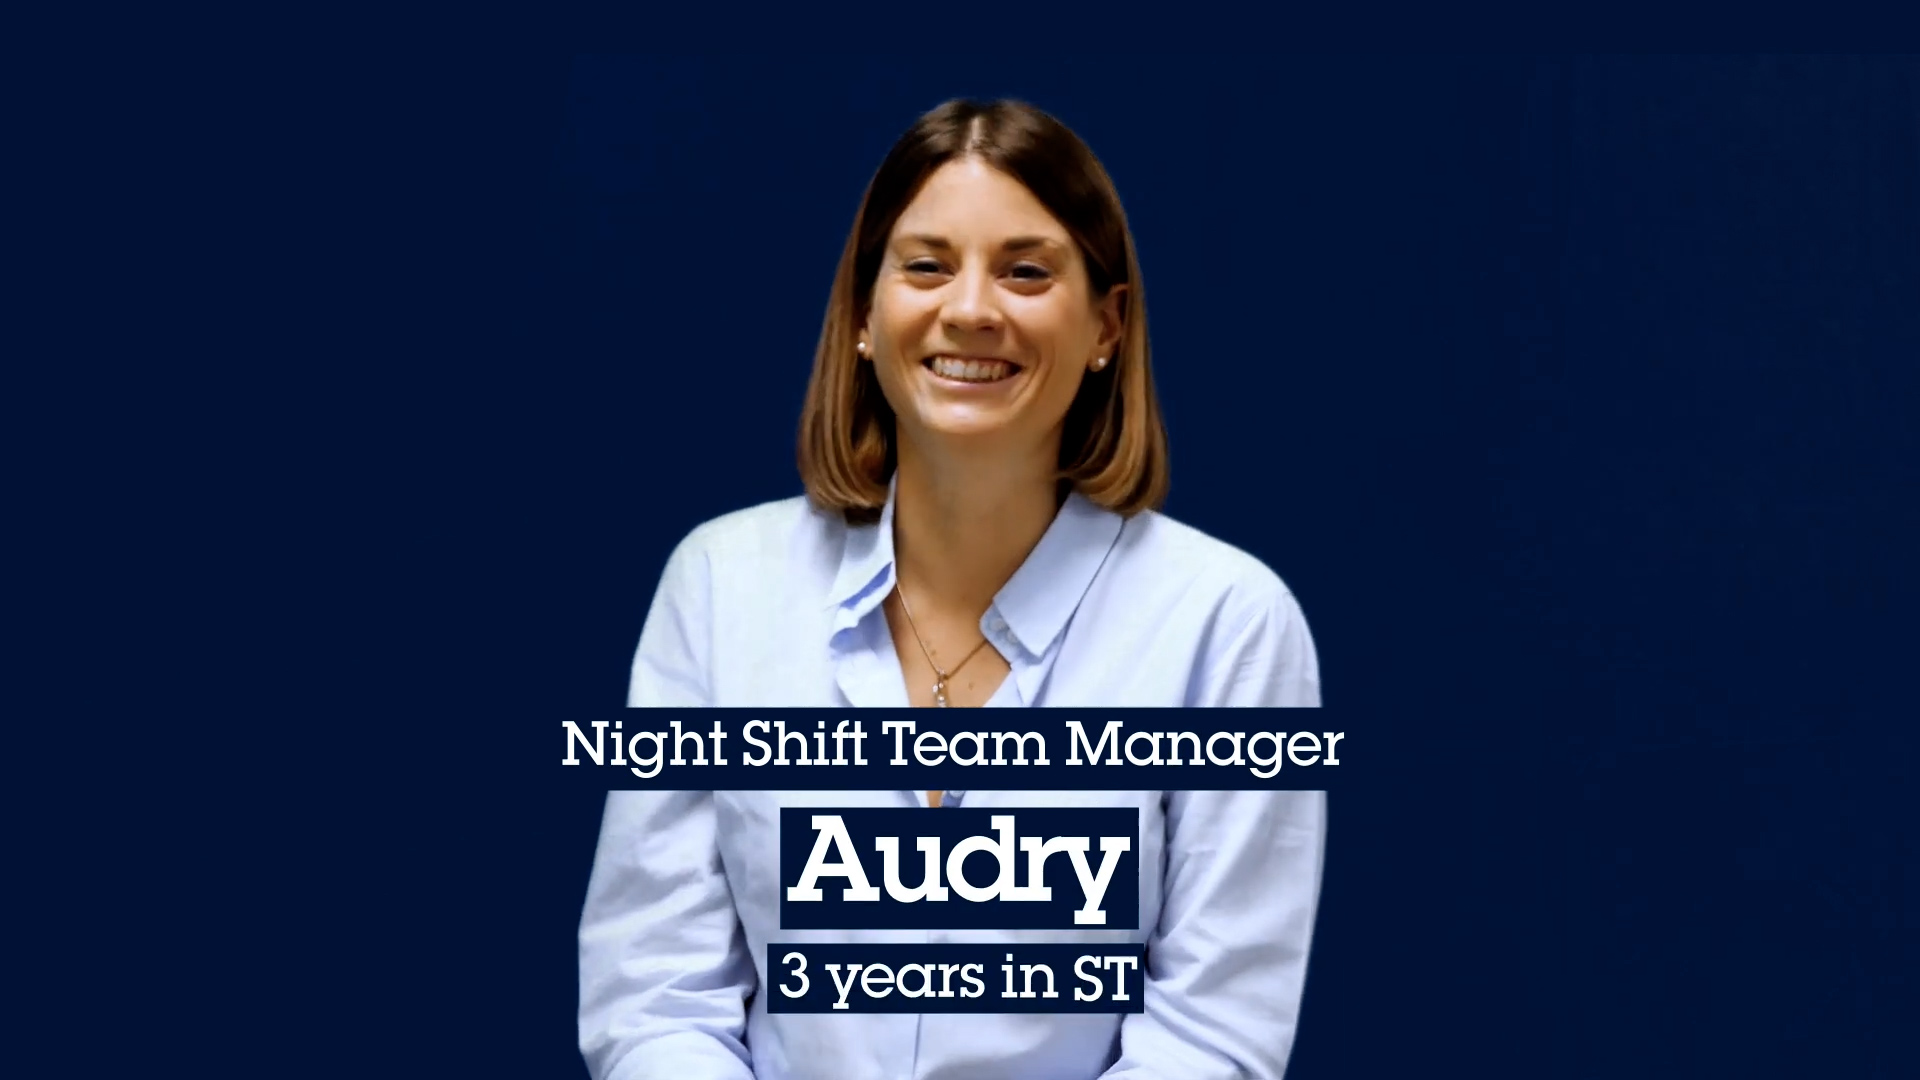 【ST Career】STMicroelectronics Audry – Night shift Team Manager